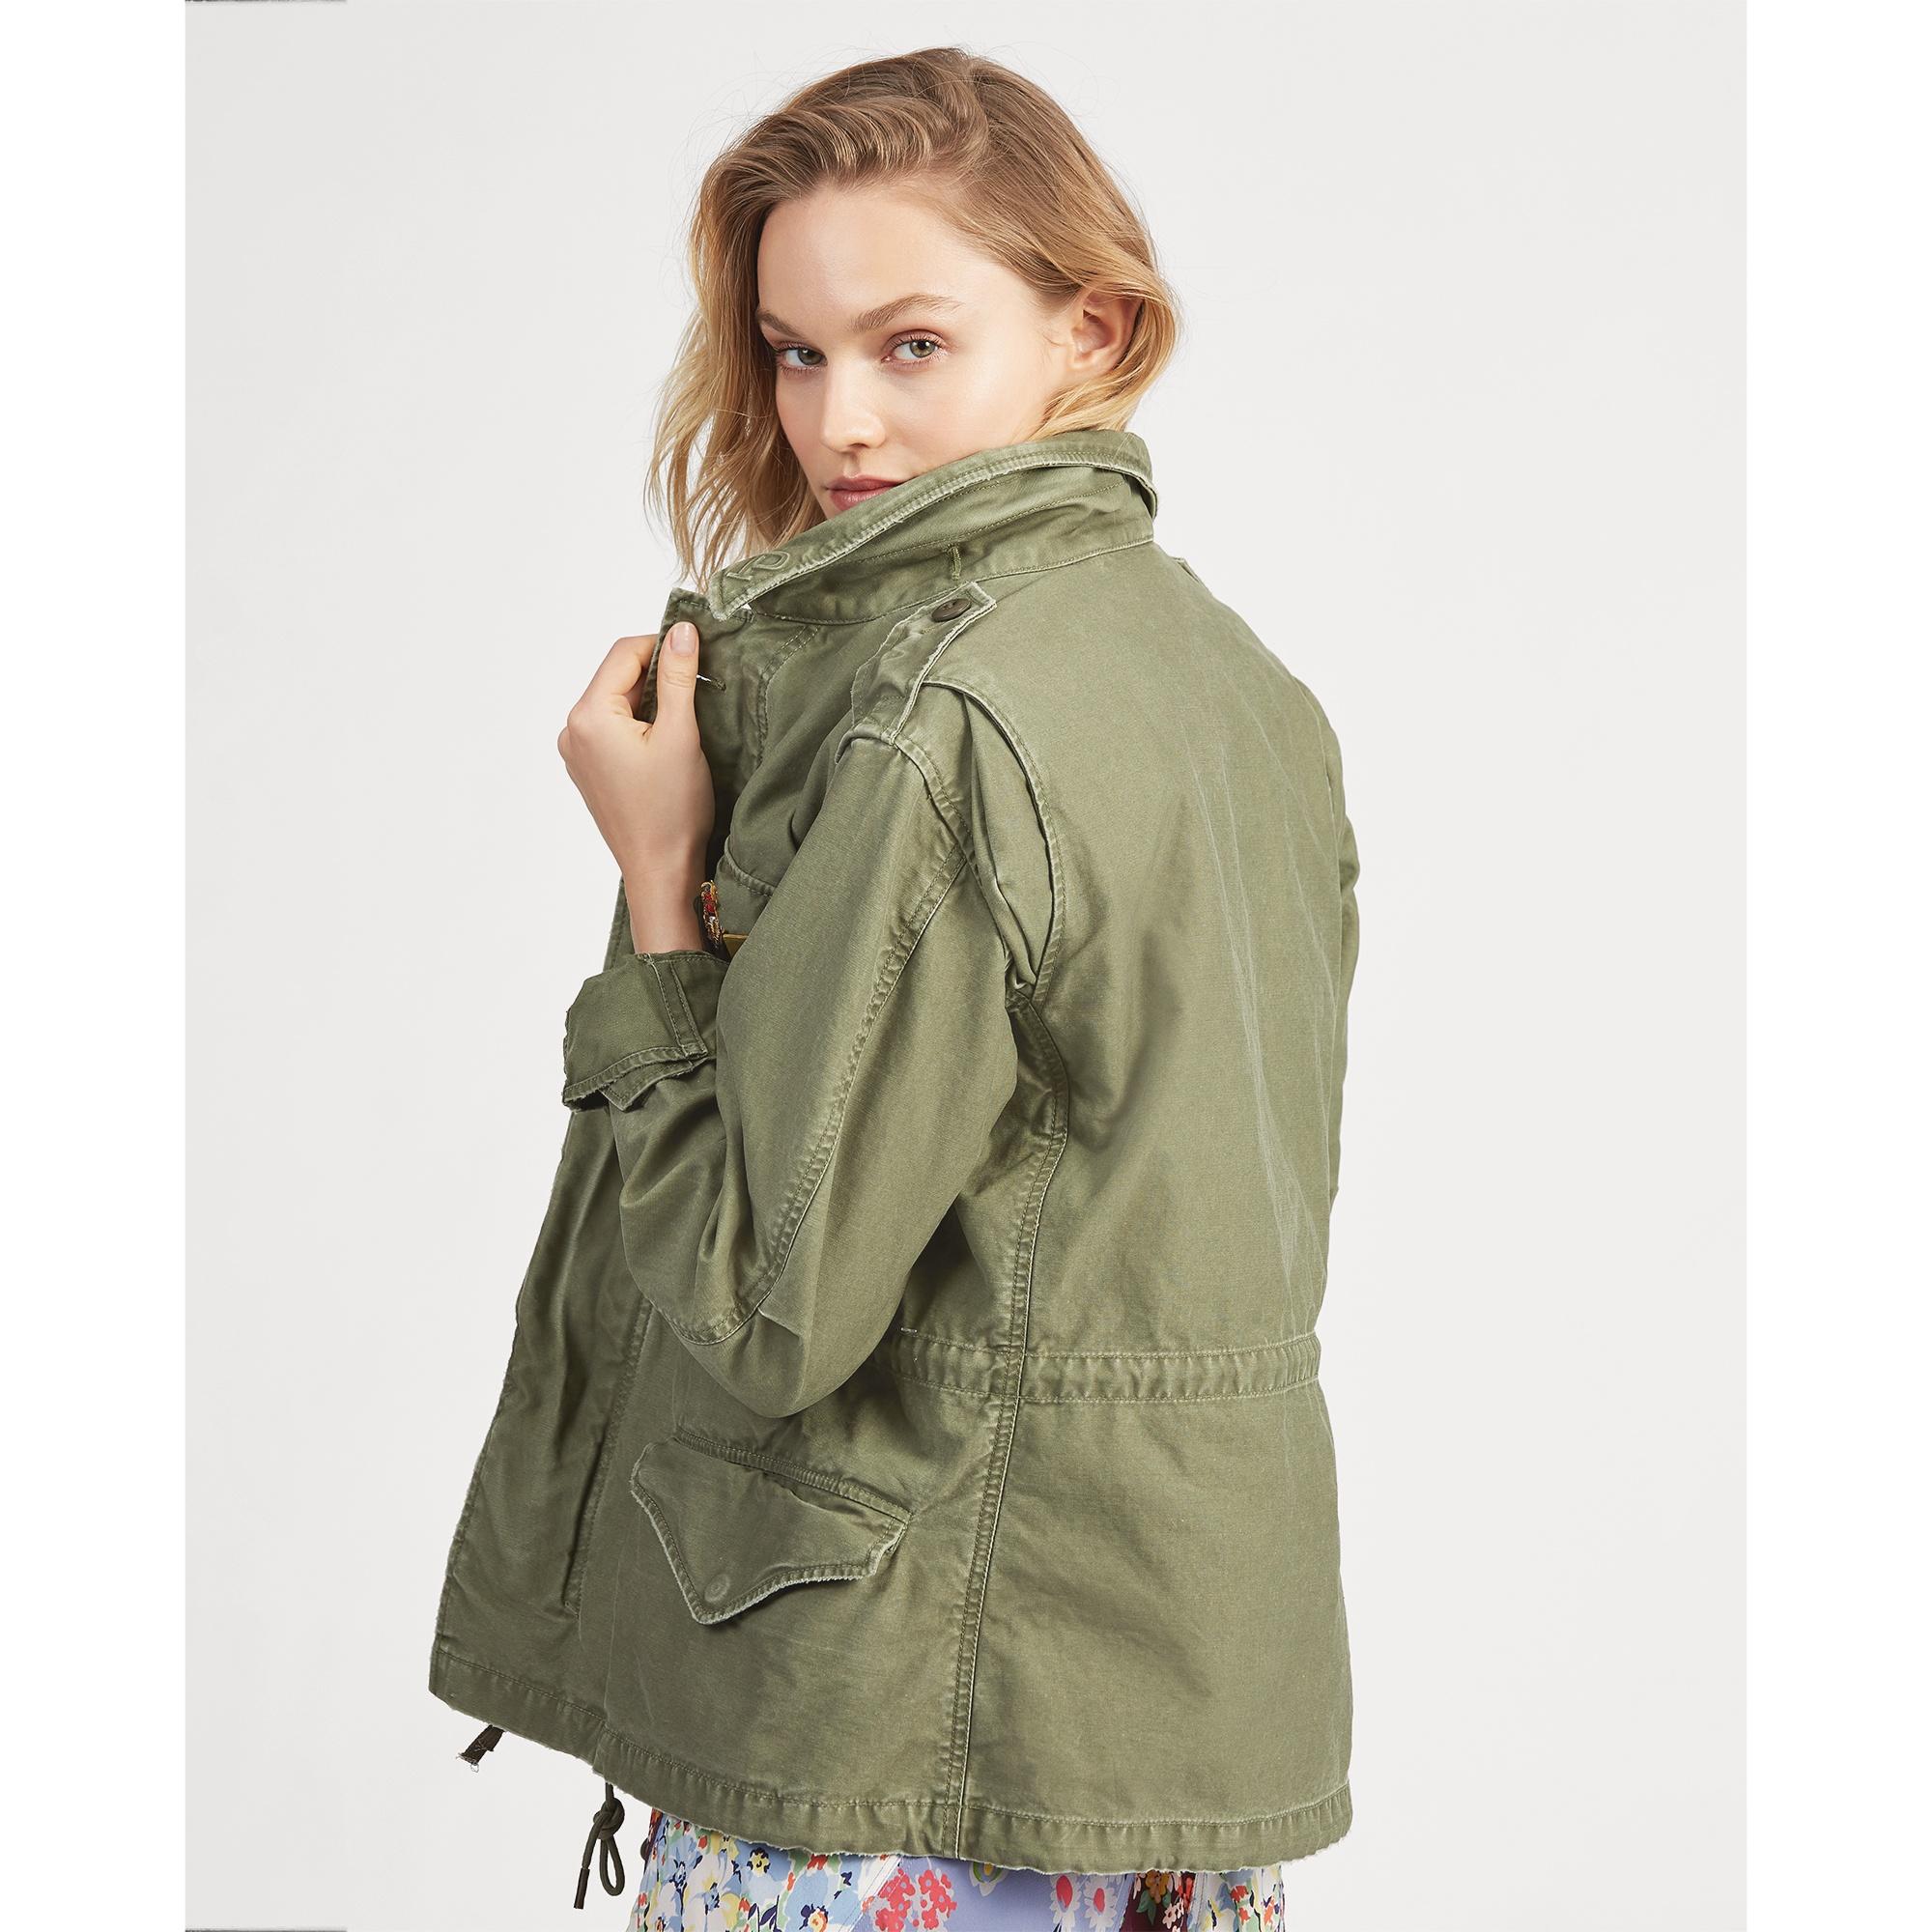 Polo Ralph Lauren Cotton Twill Military Jacket in Army Olive (Green) | Lyst